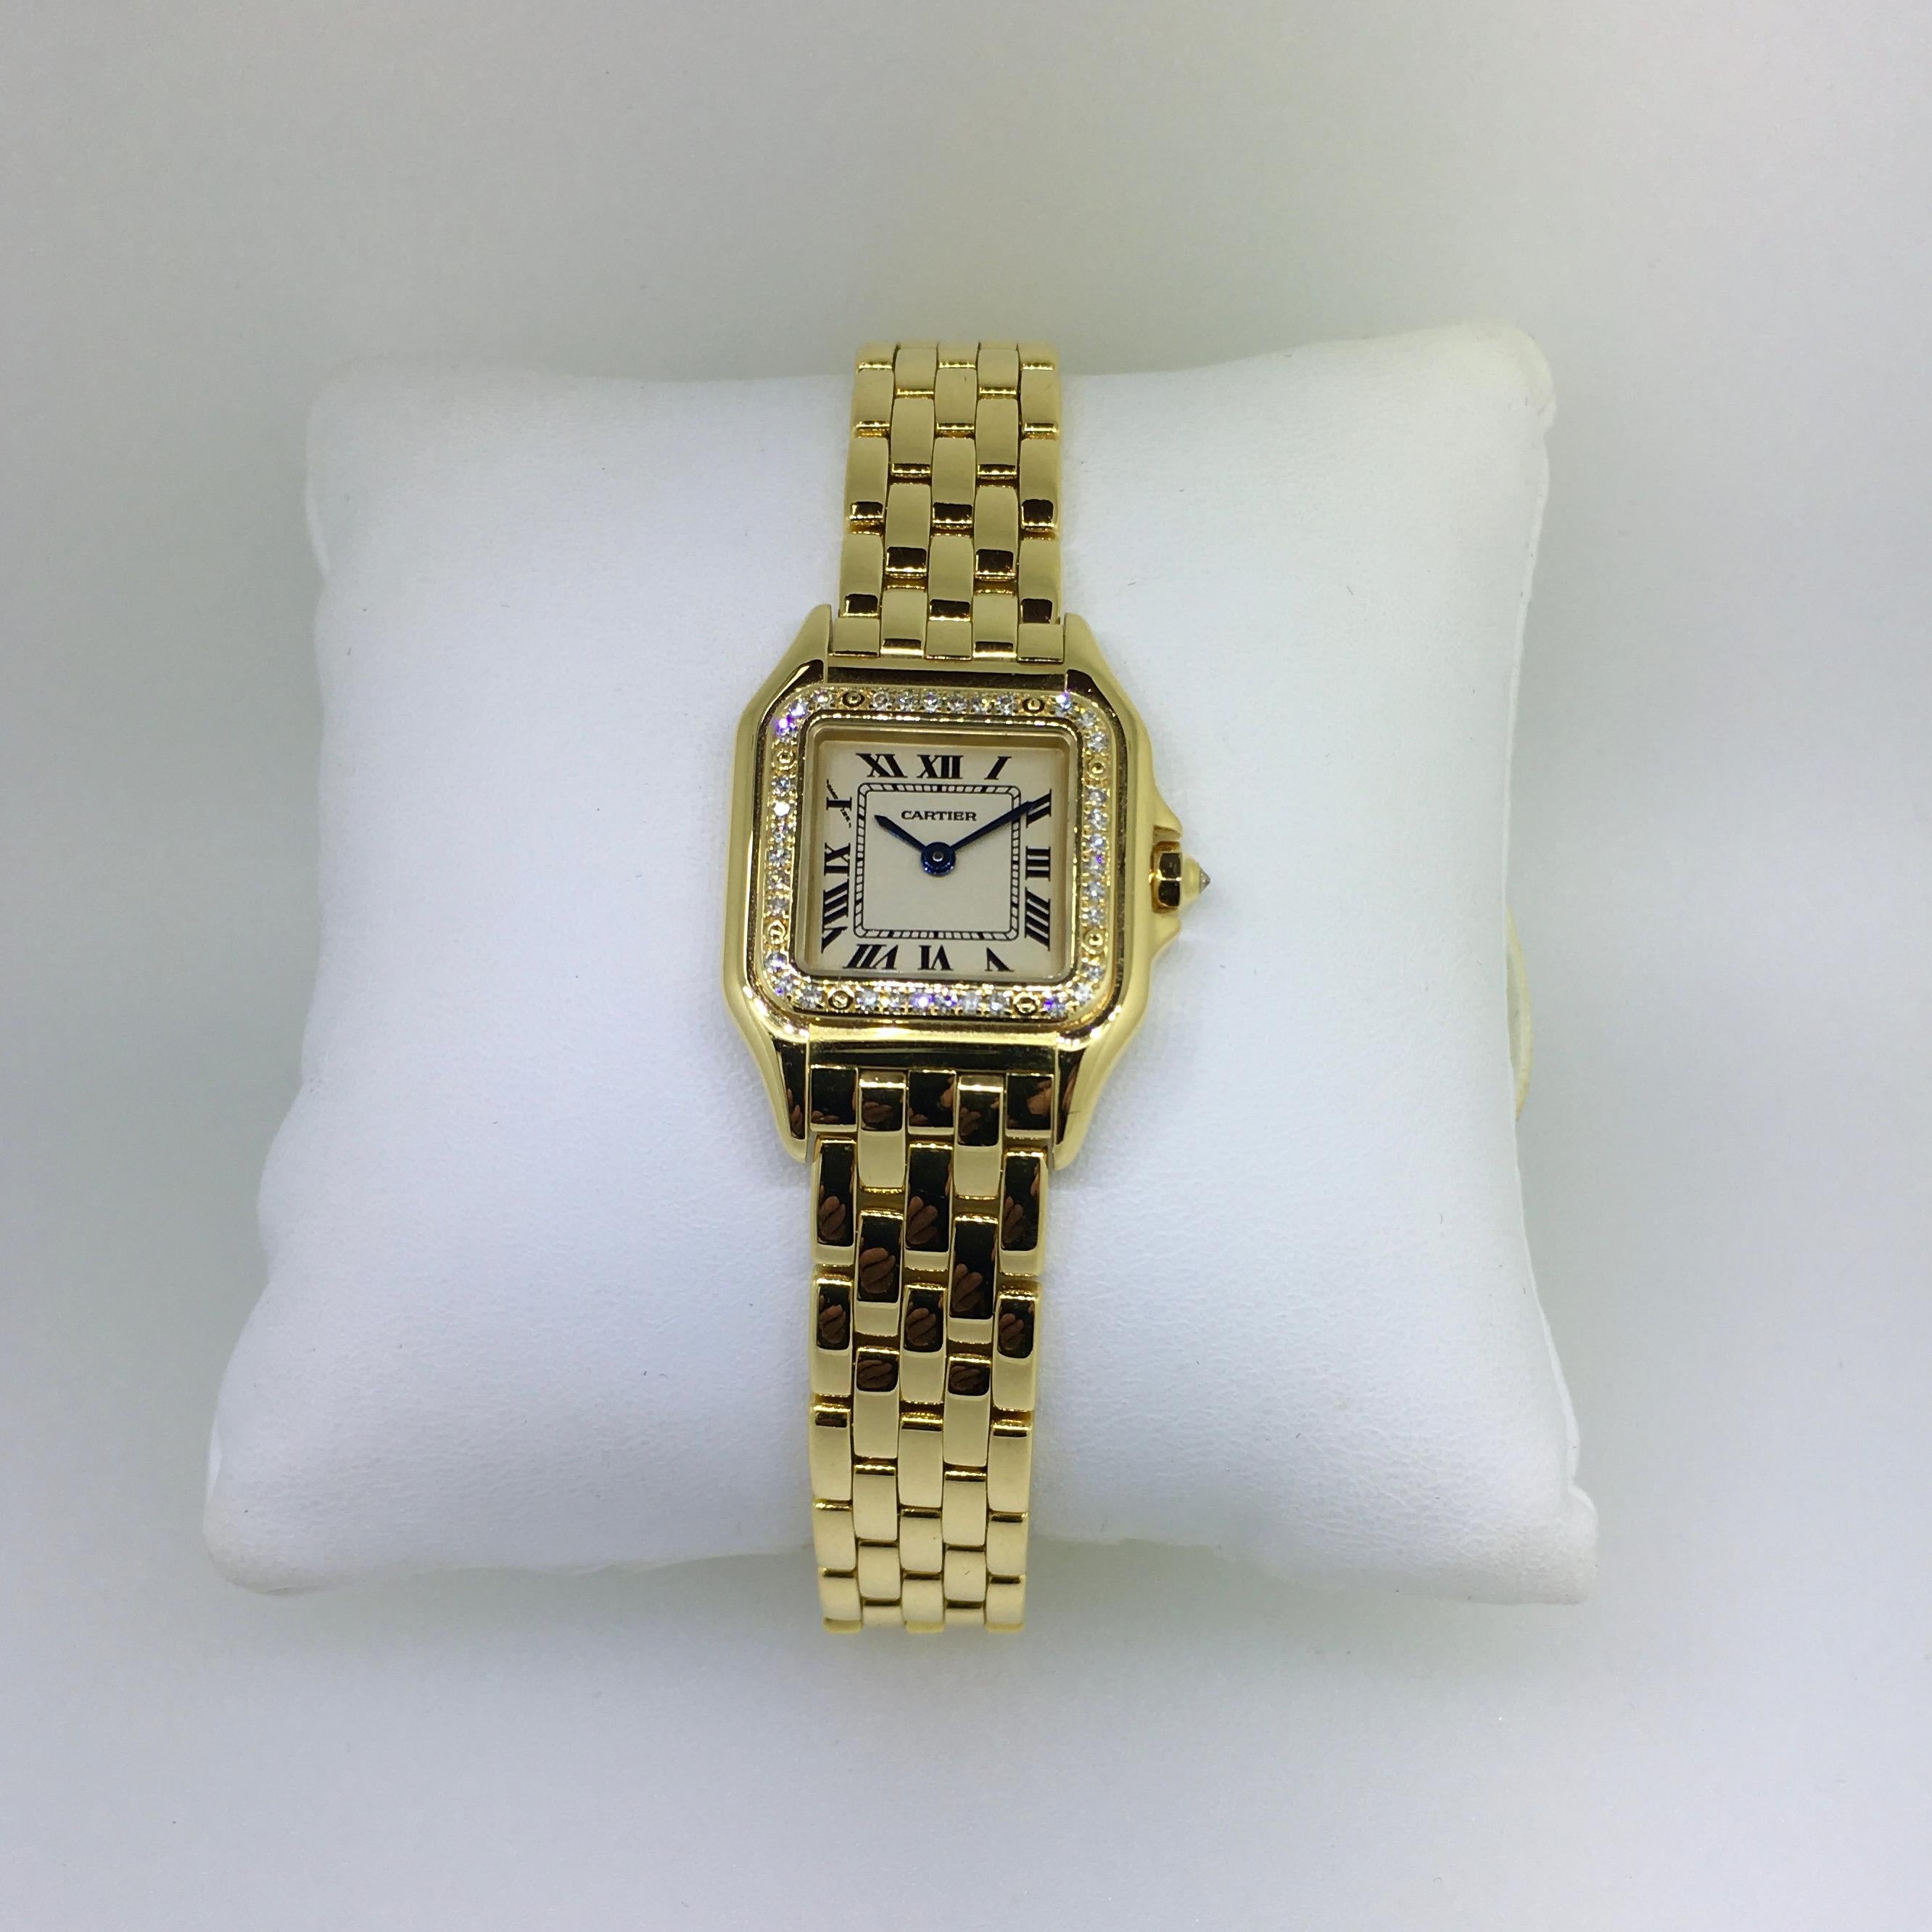 Cartier Panthère, Yellow Gold, Diamonds, Reference 1280-2, Mint Condition 7